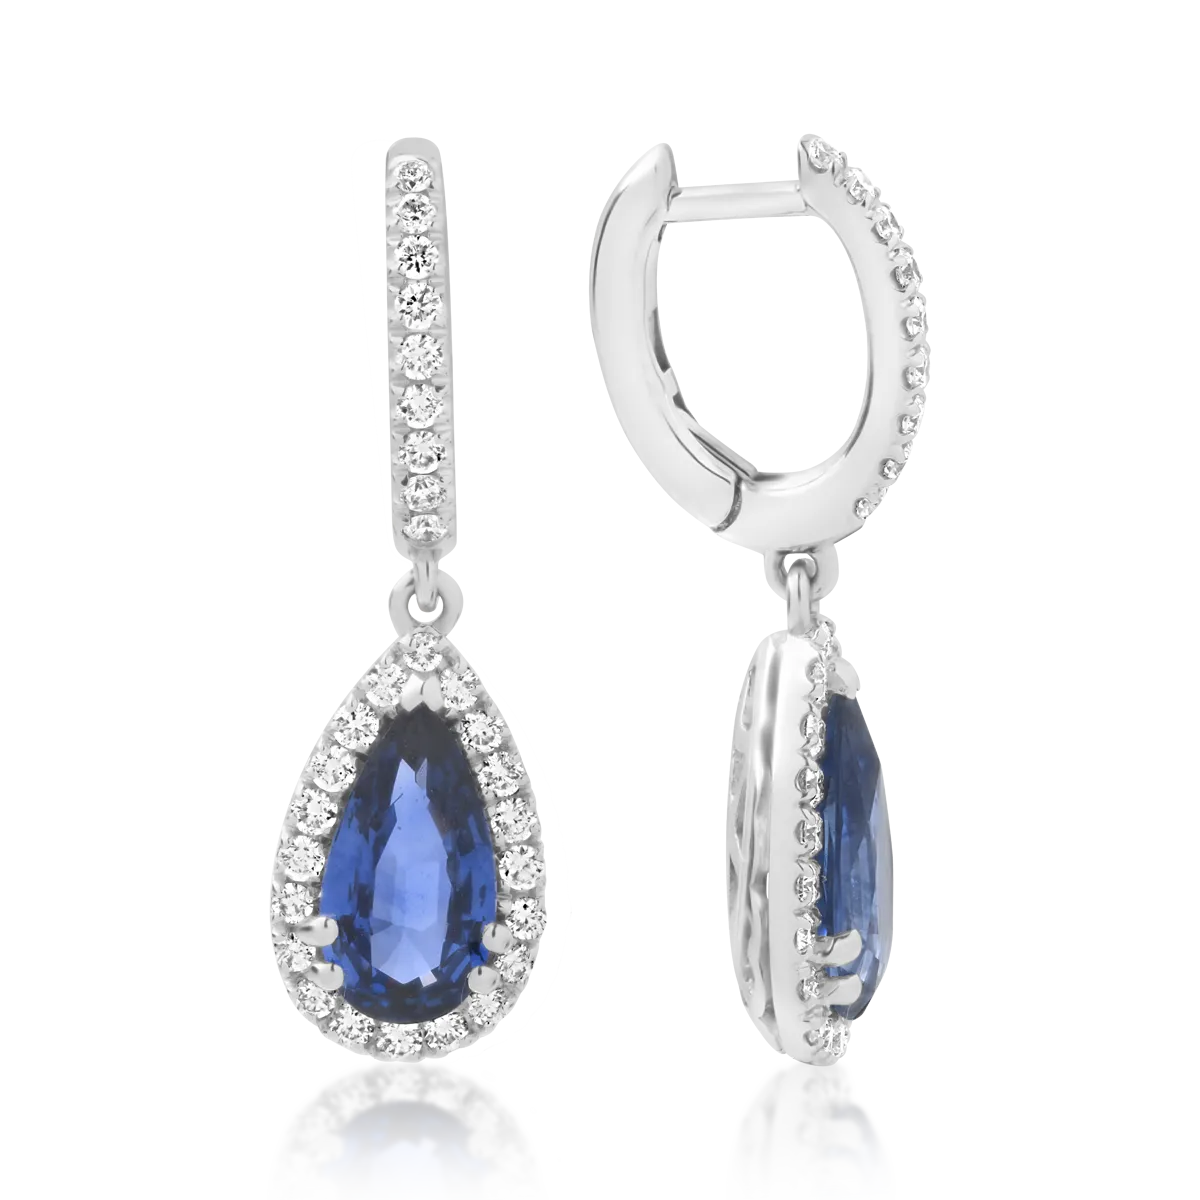 18K white gold earrings with 2.52ct sapphires and 0.54ct diamonds